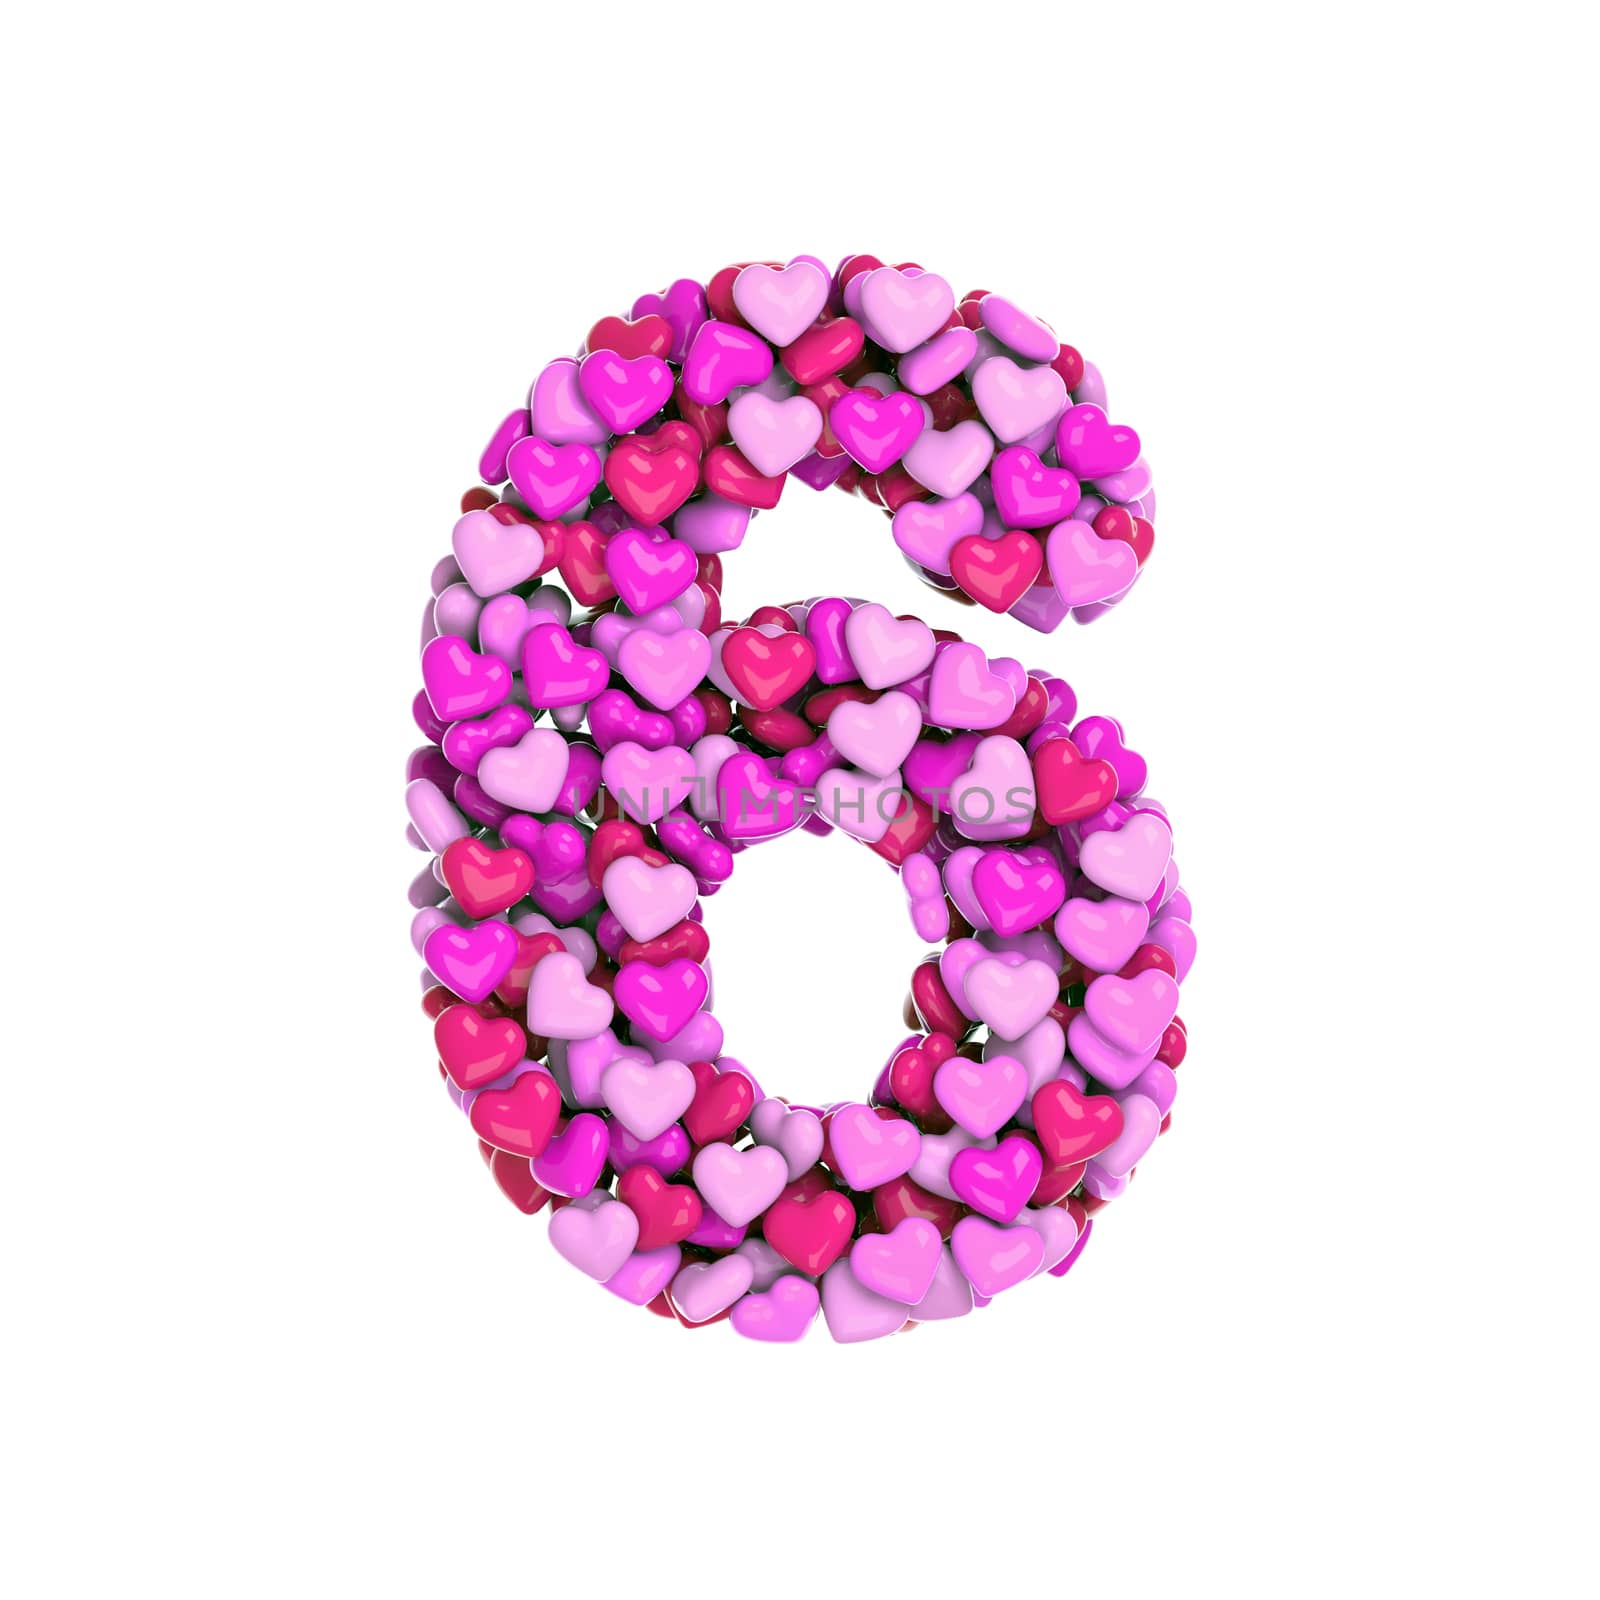 Valentine number 6 -  3d pink hearts digit - Love, passion or wedding concept by chrisroll